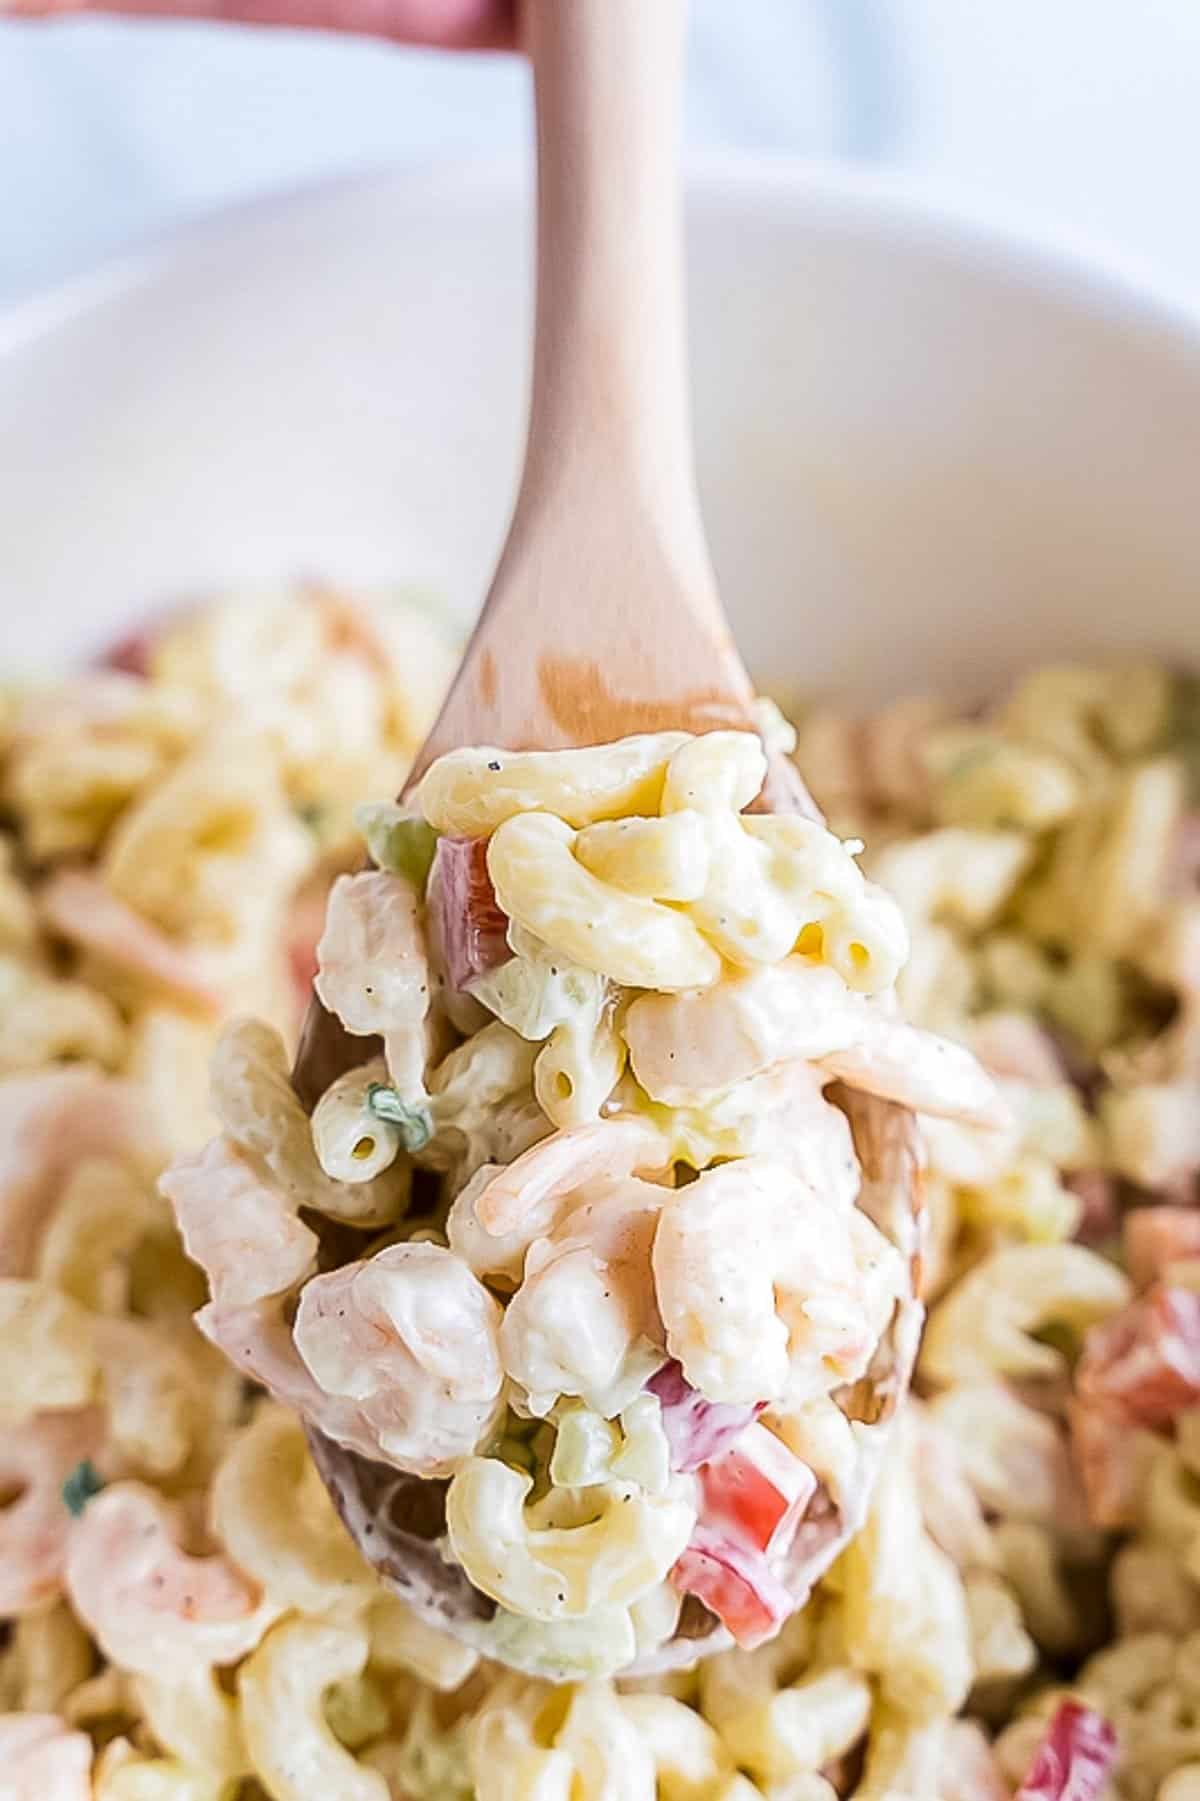 Bowl with Shrimp Pasta Salad and wooden spoons